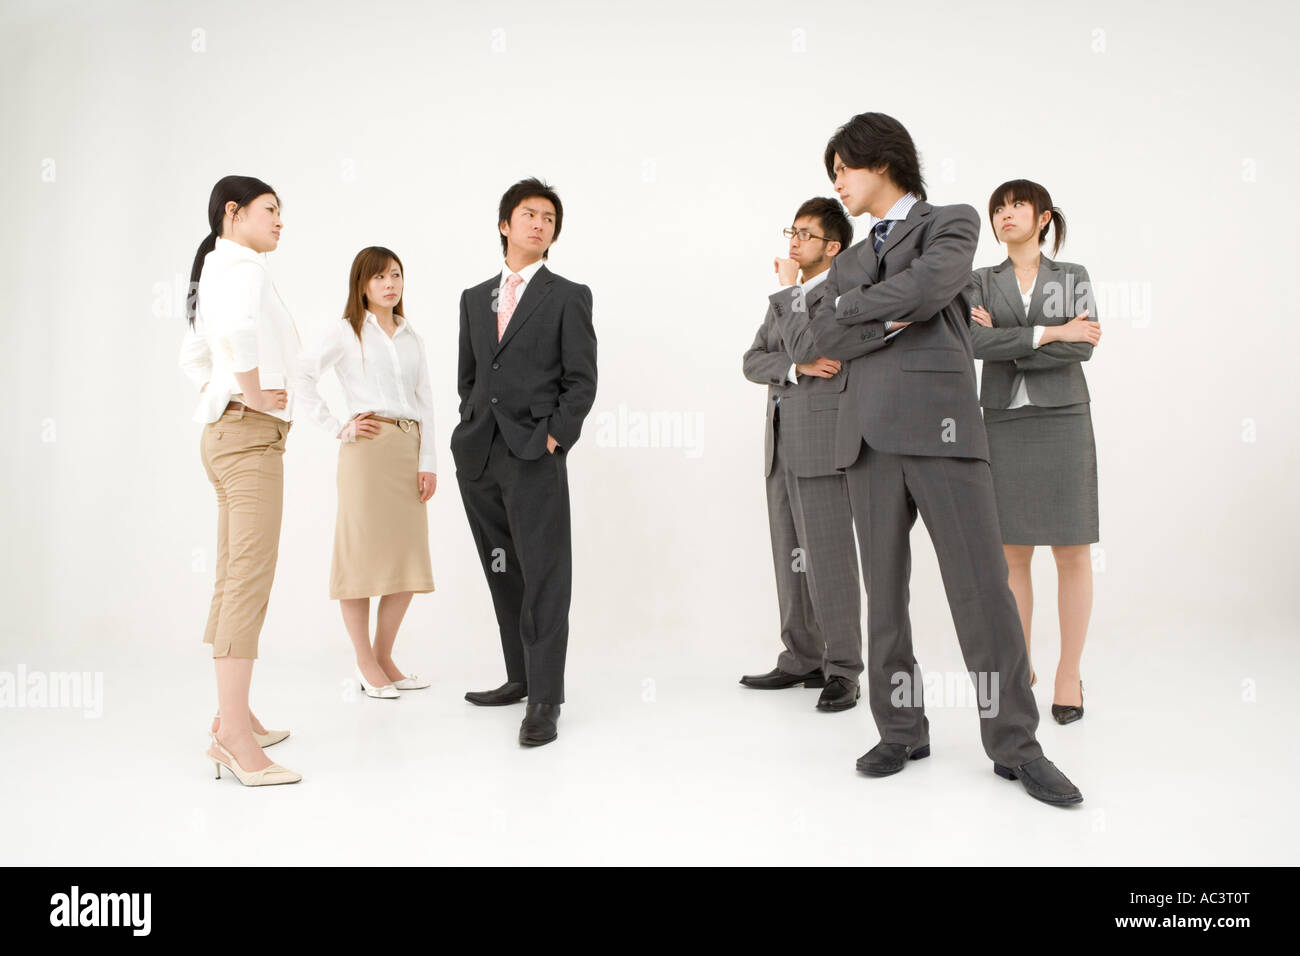 Business people glaring at each other Stock Photo